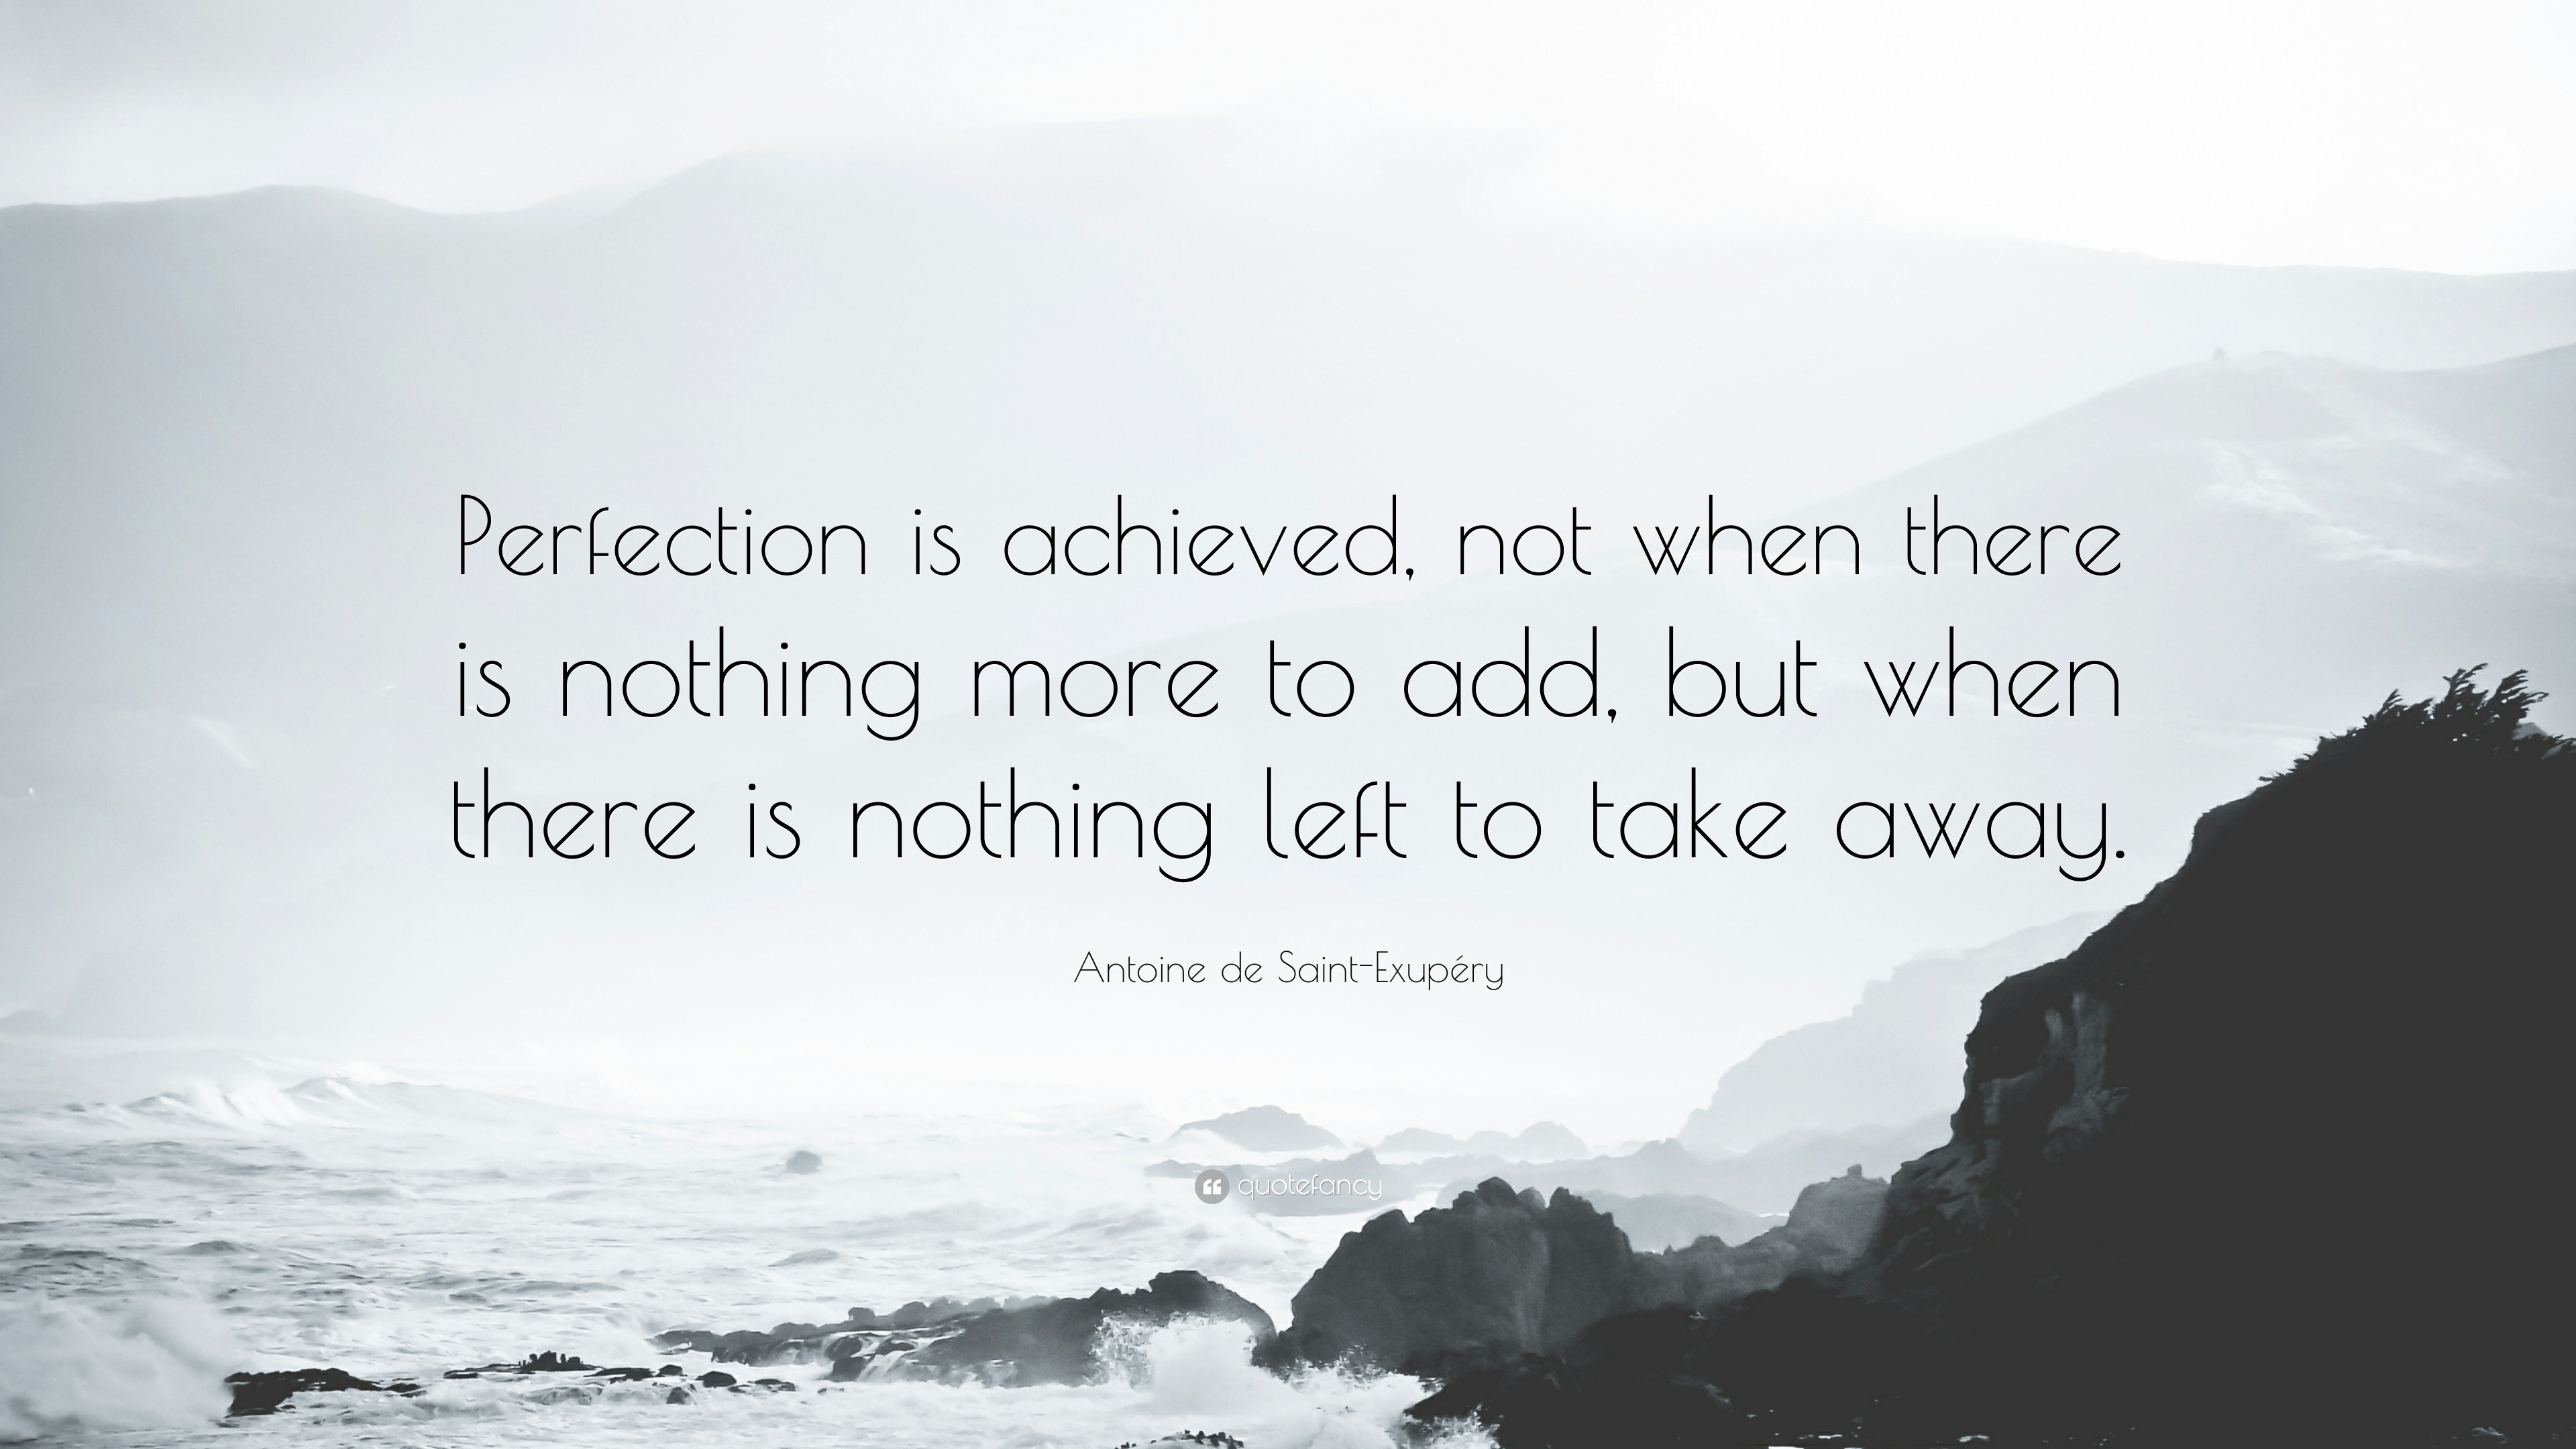 Antoine de Saint-Exupéry Quote: “Perfection is achieved, not when there is nothing ...3840 x 2160